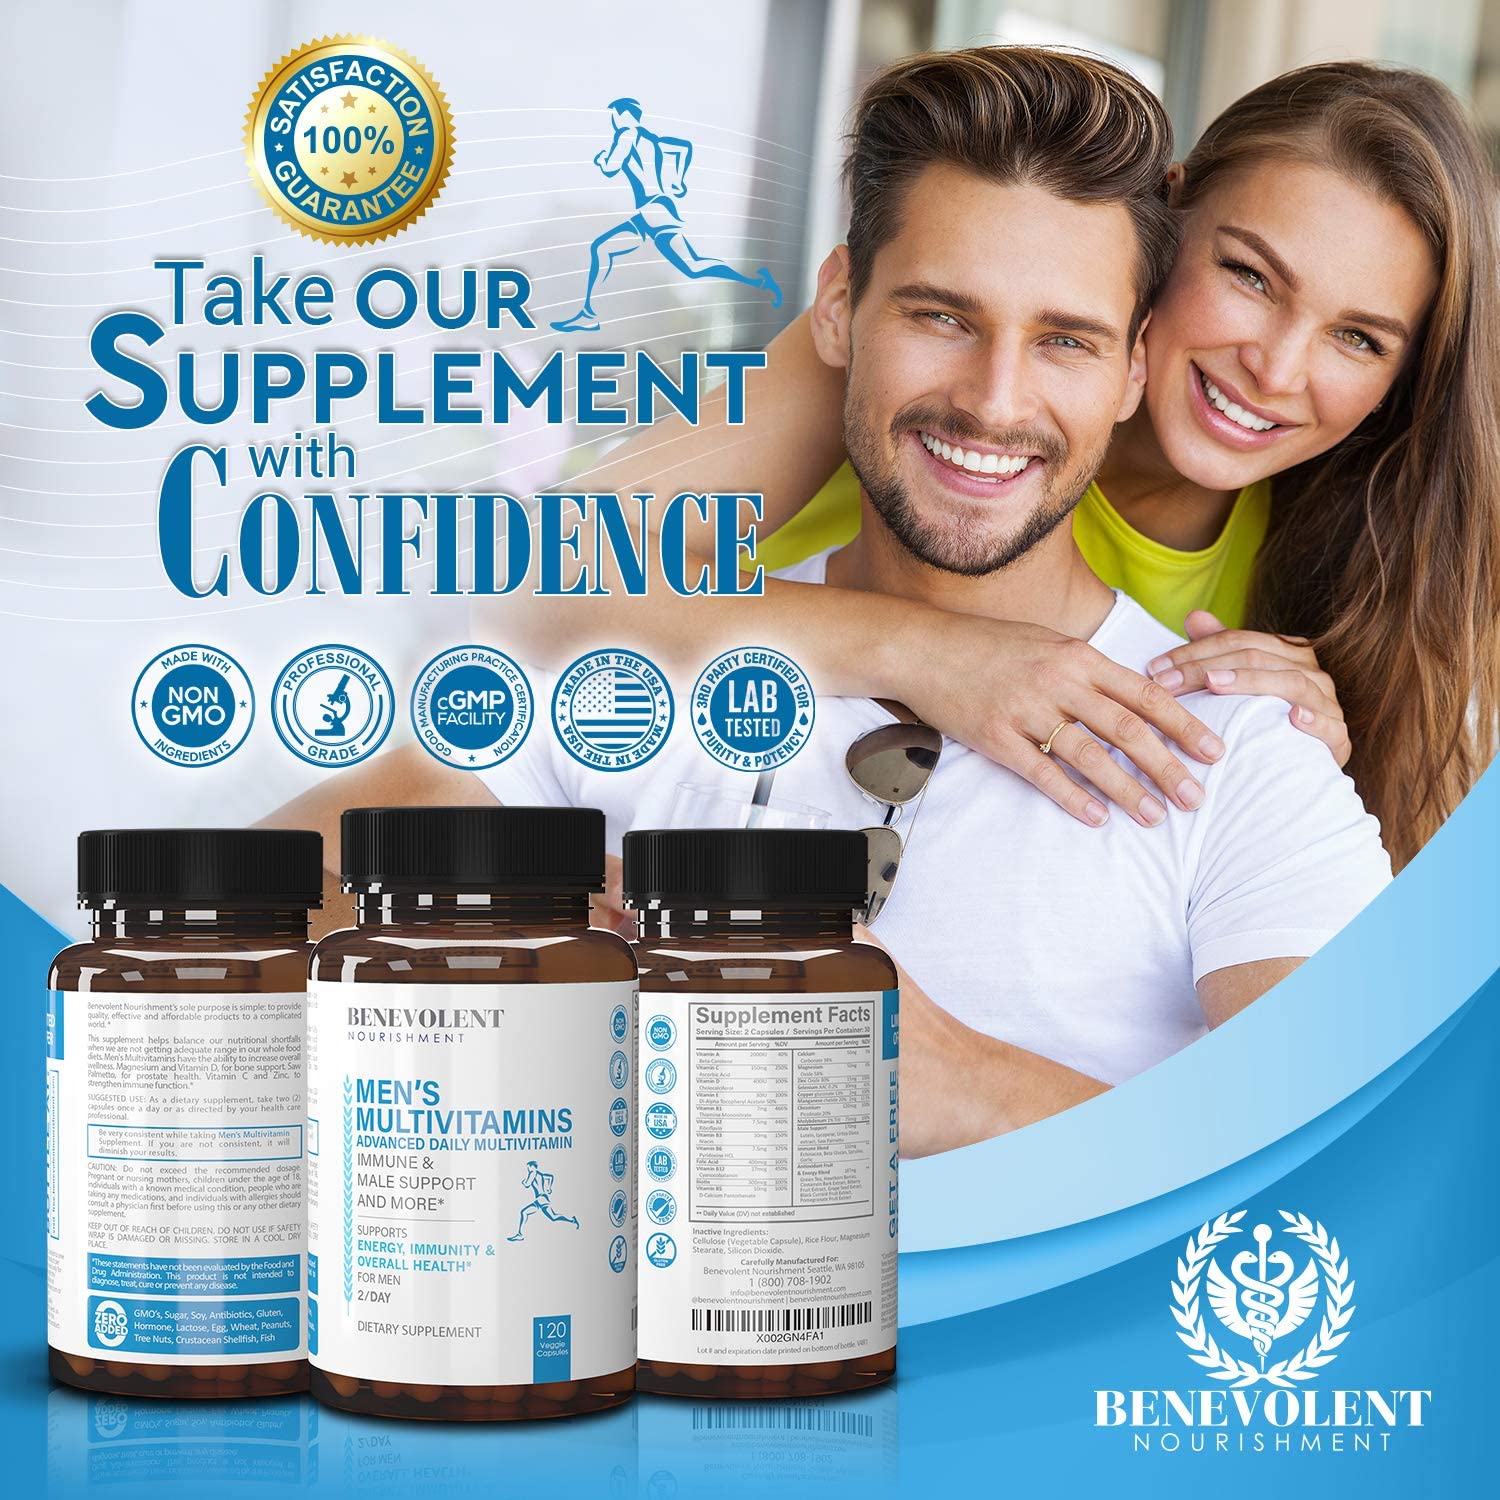 Take our supplements with confidence